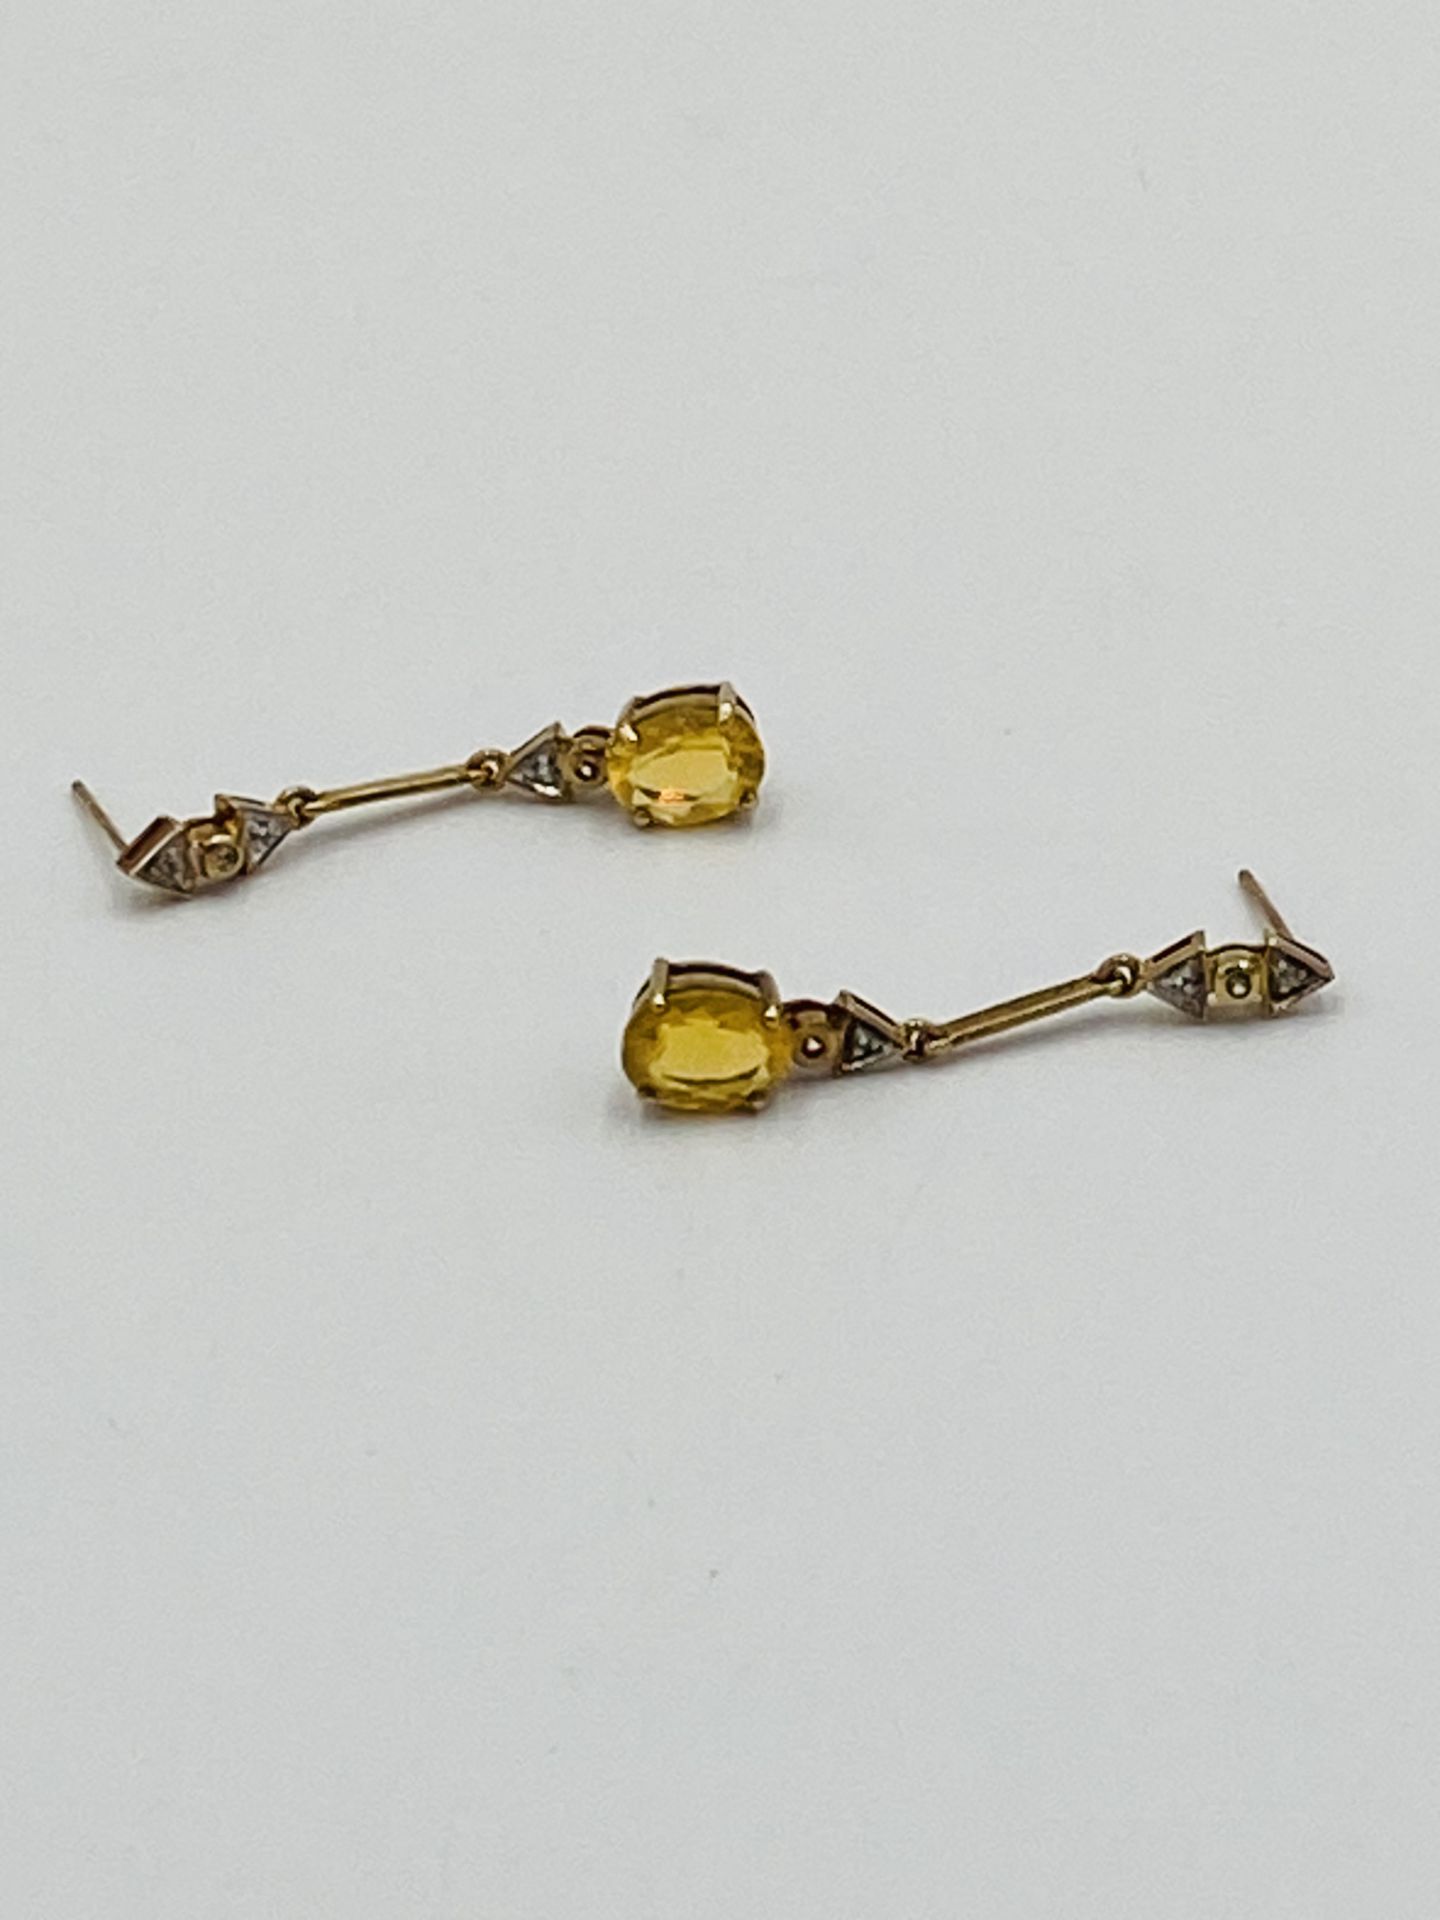 Pair of 9ct gold earrings - Image 3 of 6